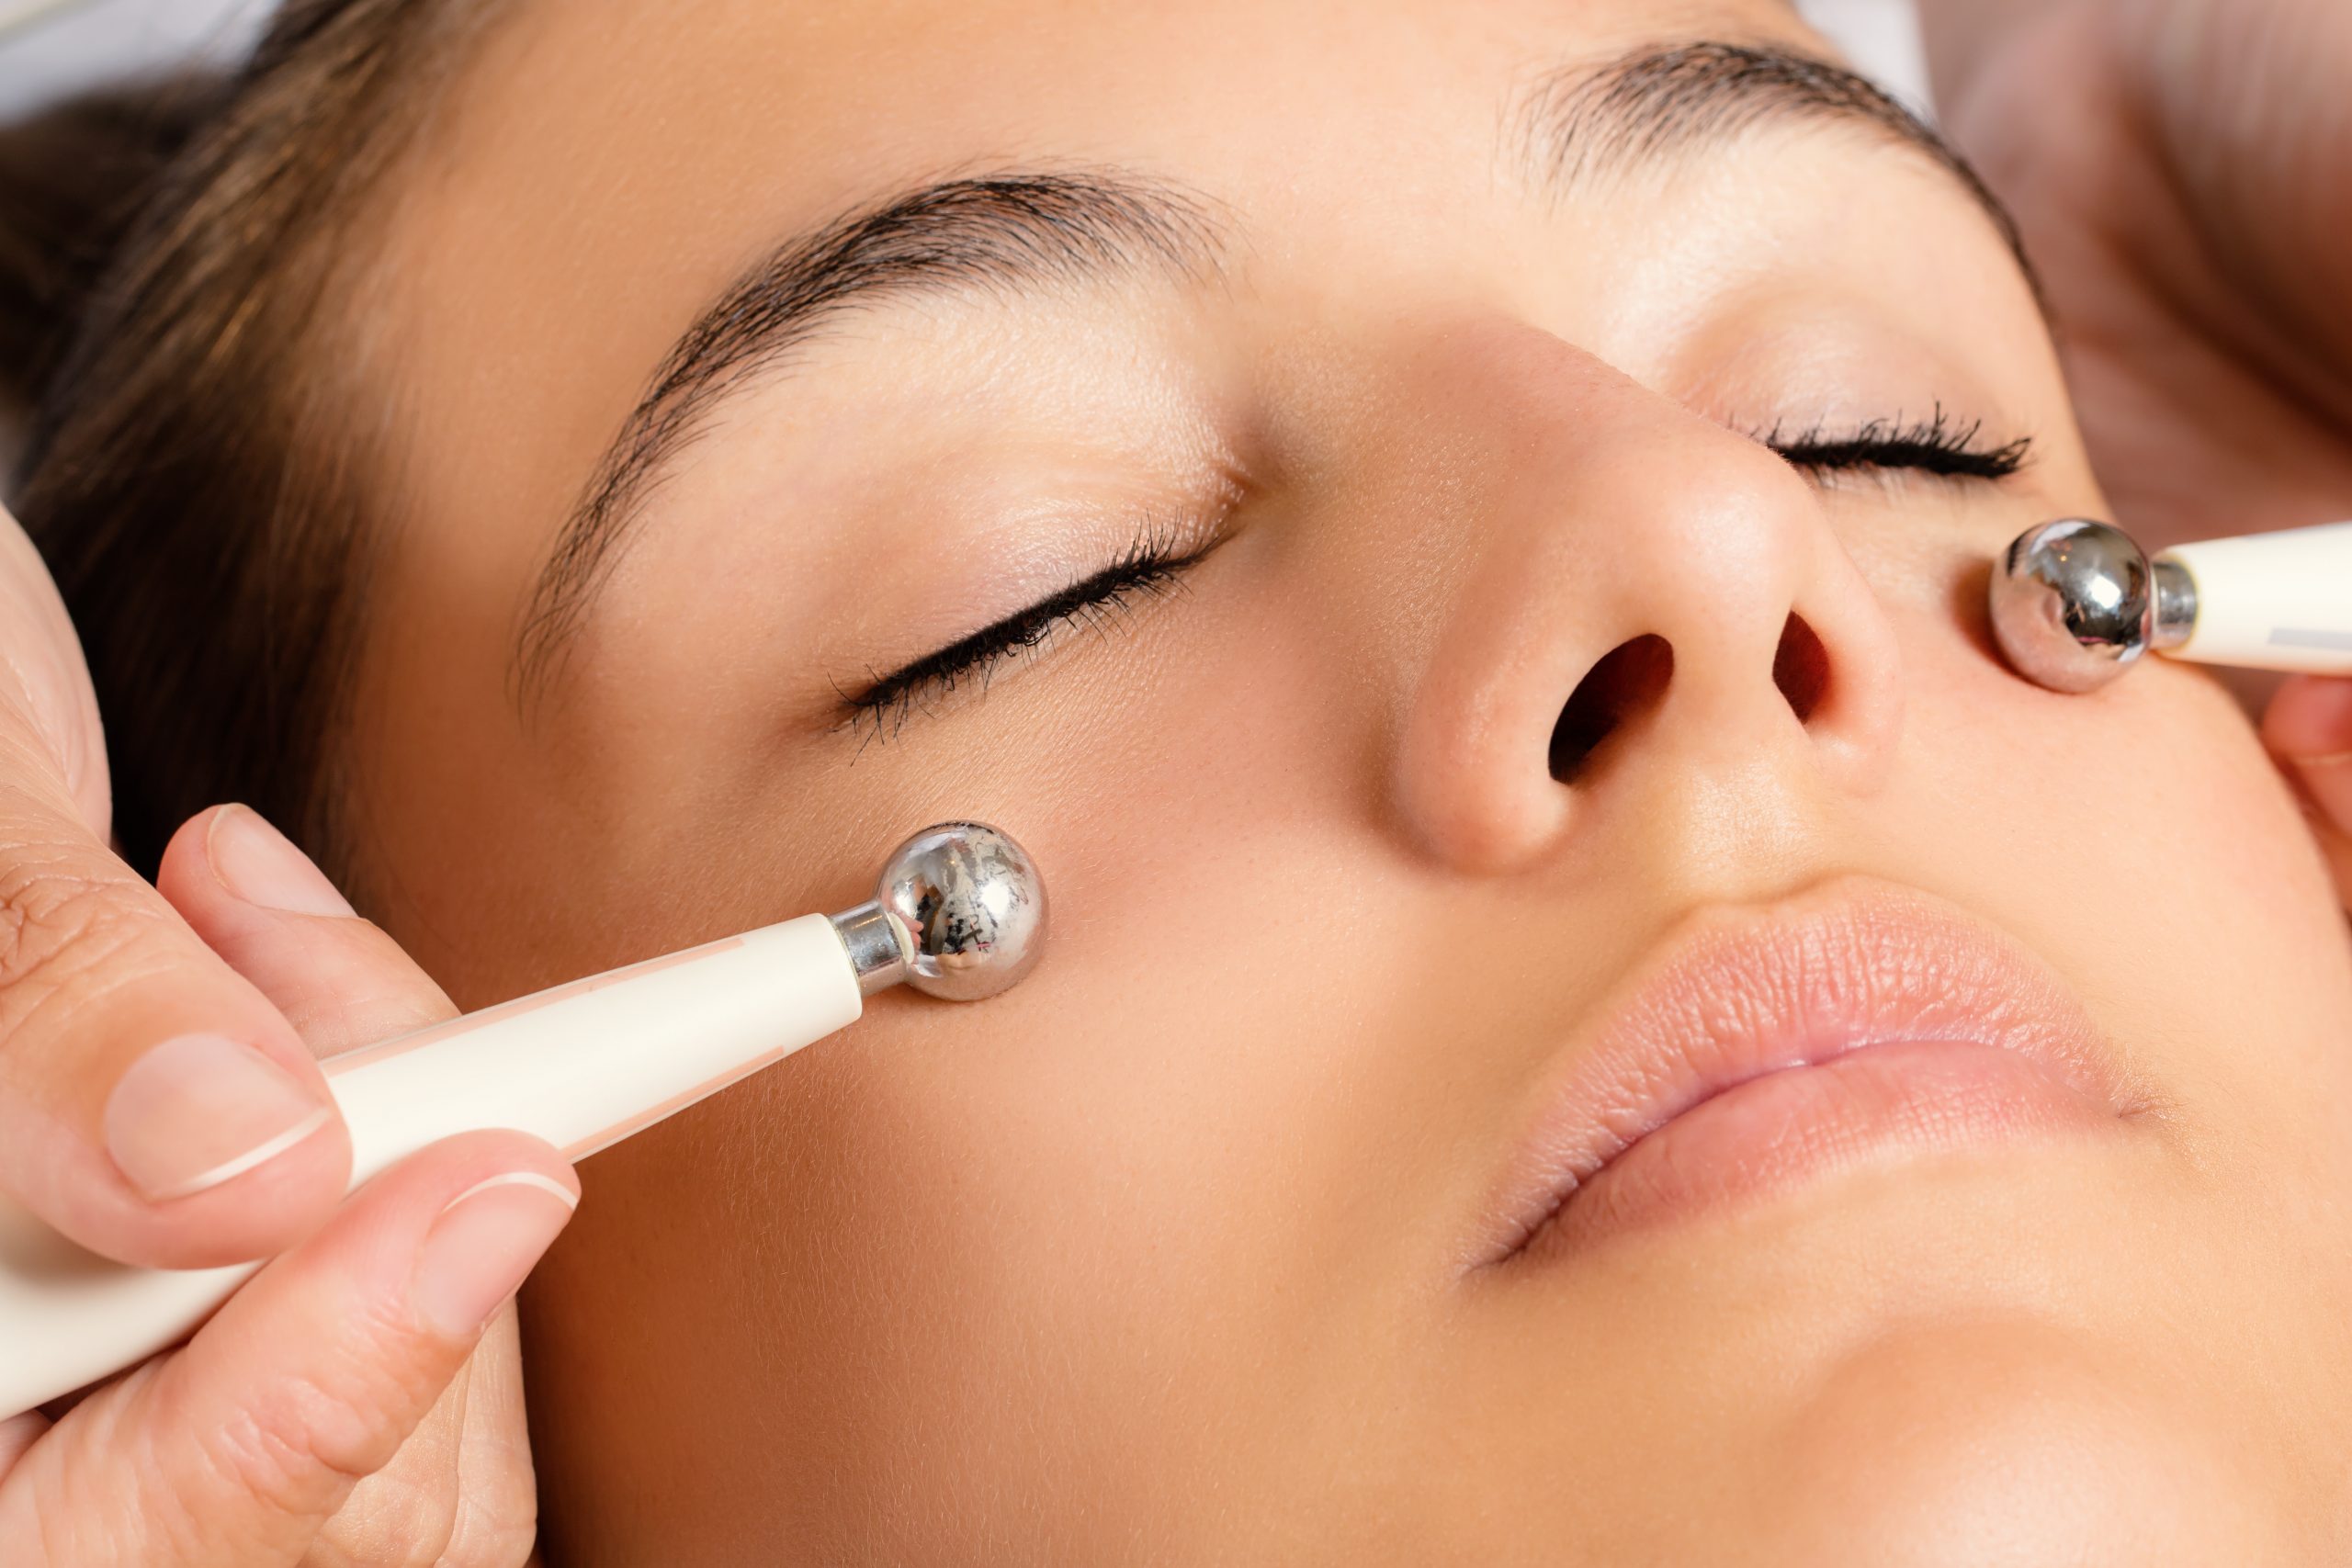 Facial treatments for special occasions: looking your best for that big event